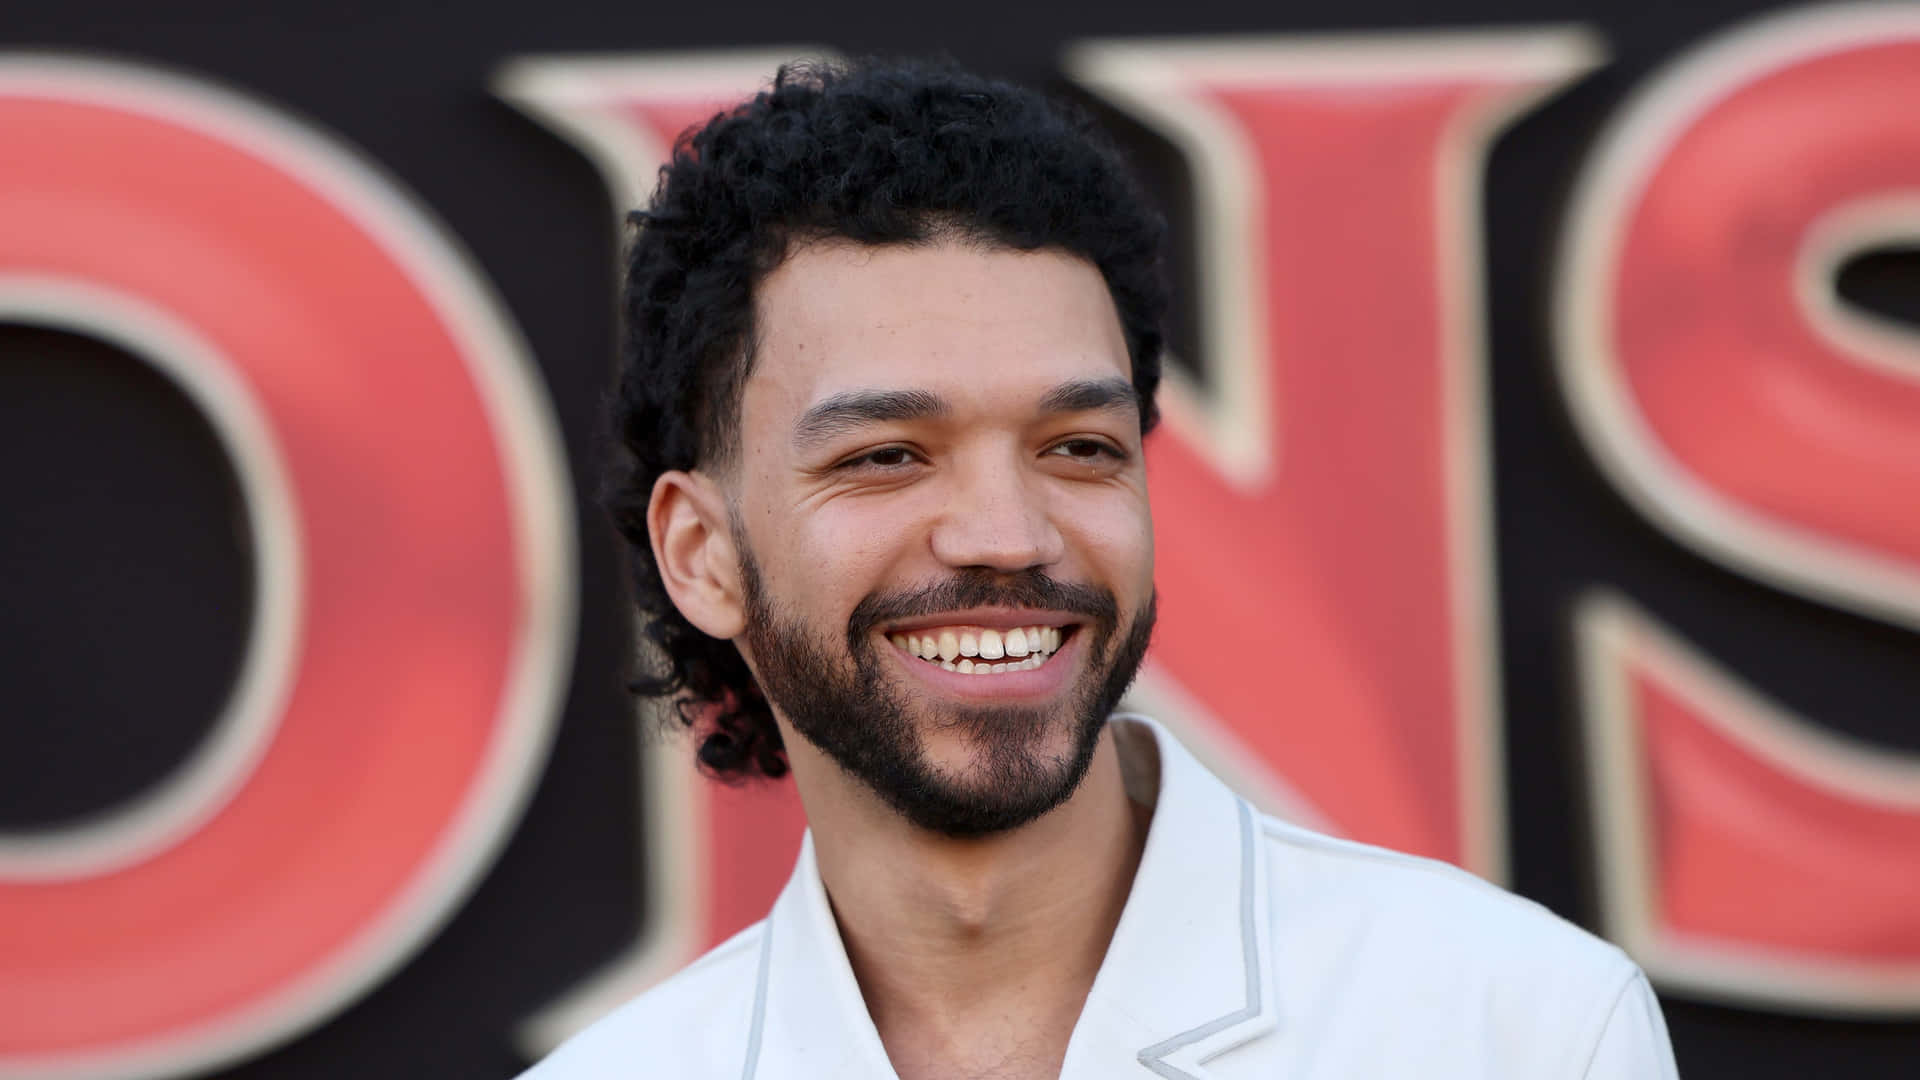 Justice Smith - Hollywood's Promising Star Wallpaper